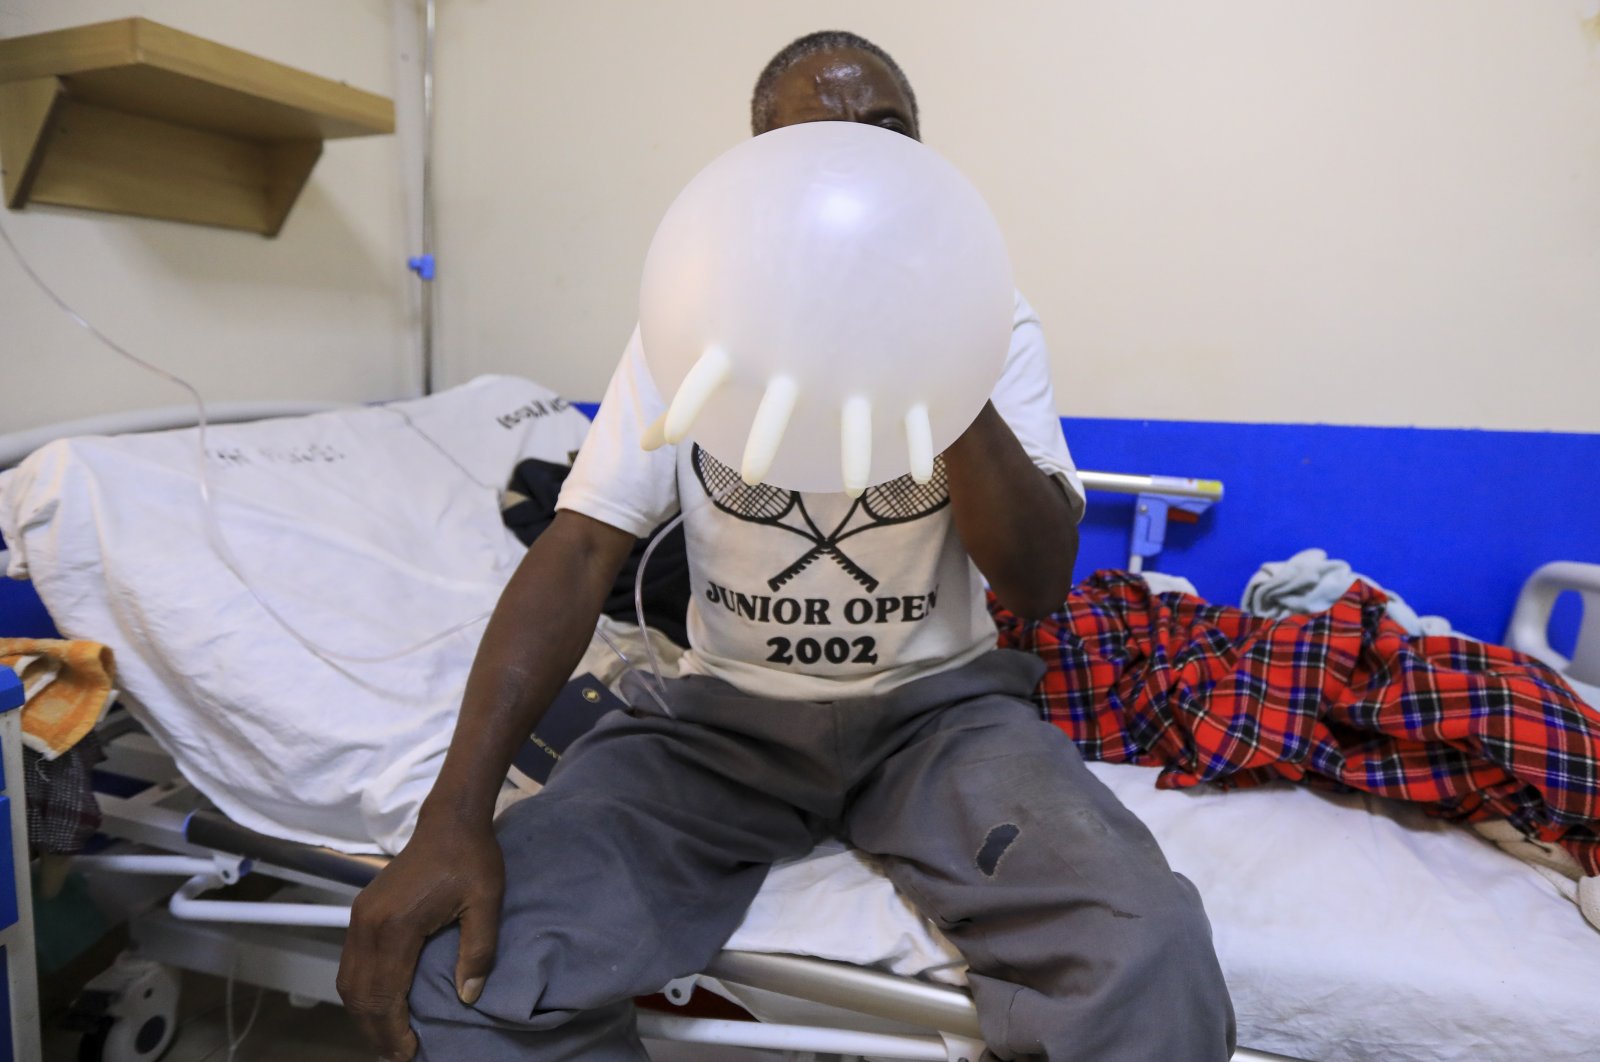 A COVID-19 patient inflates a balloon to exercise his lungs while inside an Intensive Care Unit (ICU) at the Machakos Level 5 hospital in Machakos, Kenya, Aug. 26, 2021. (EPA Photo)